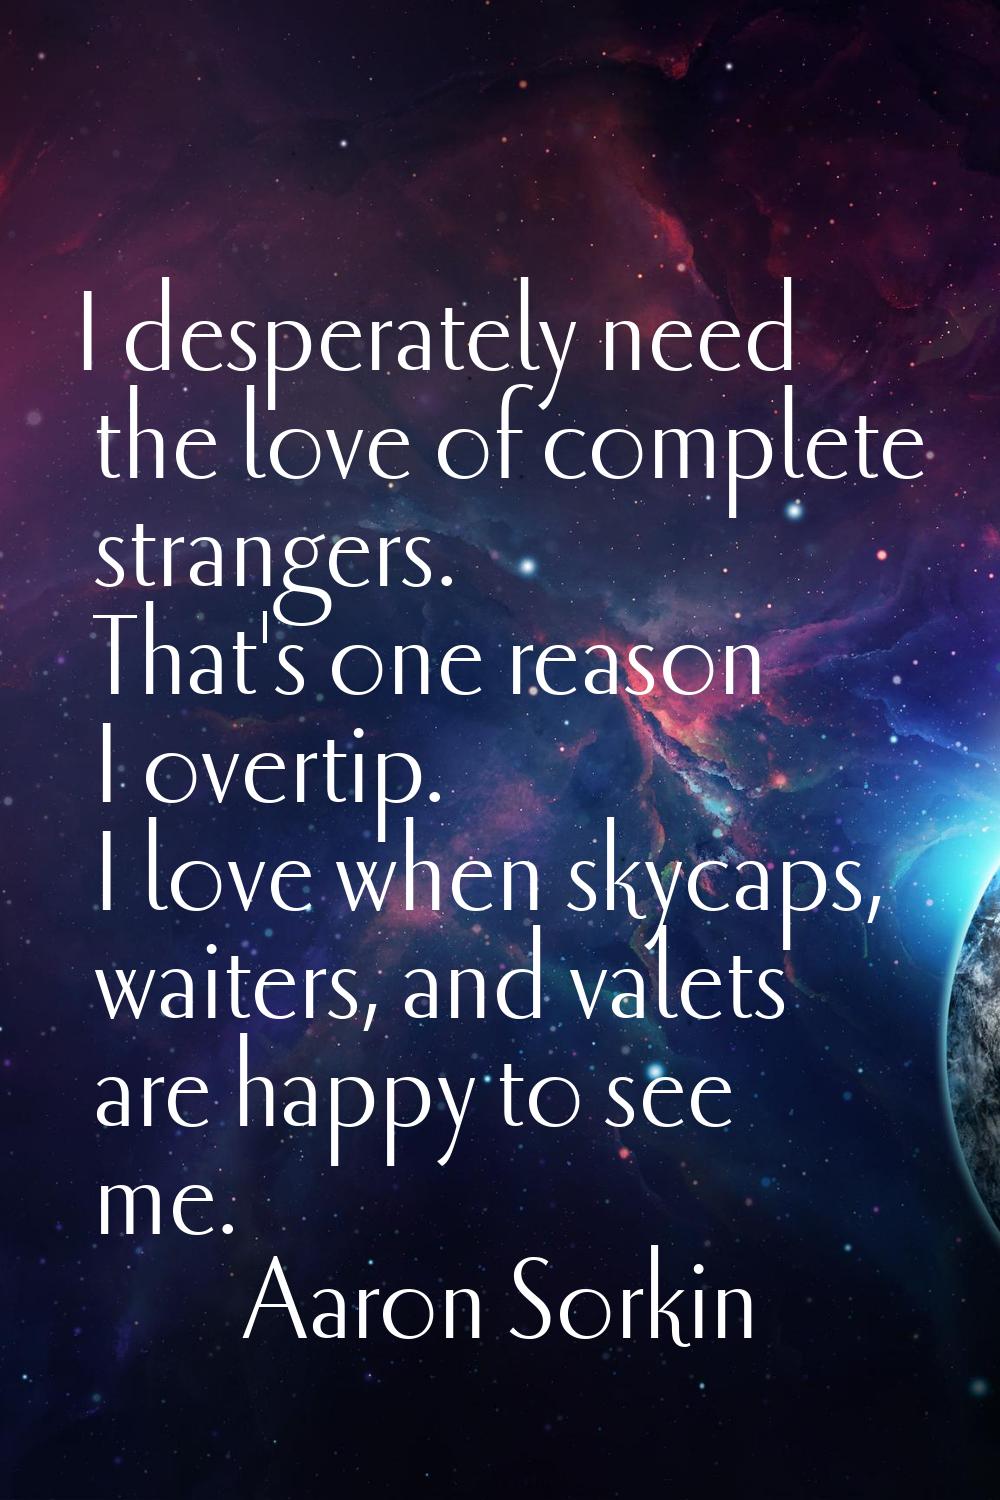 I desperately need the love of complete strangers. That's one reason I overtip. I love when skycaps